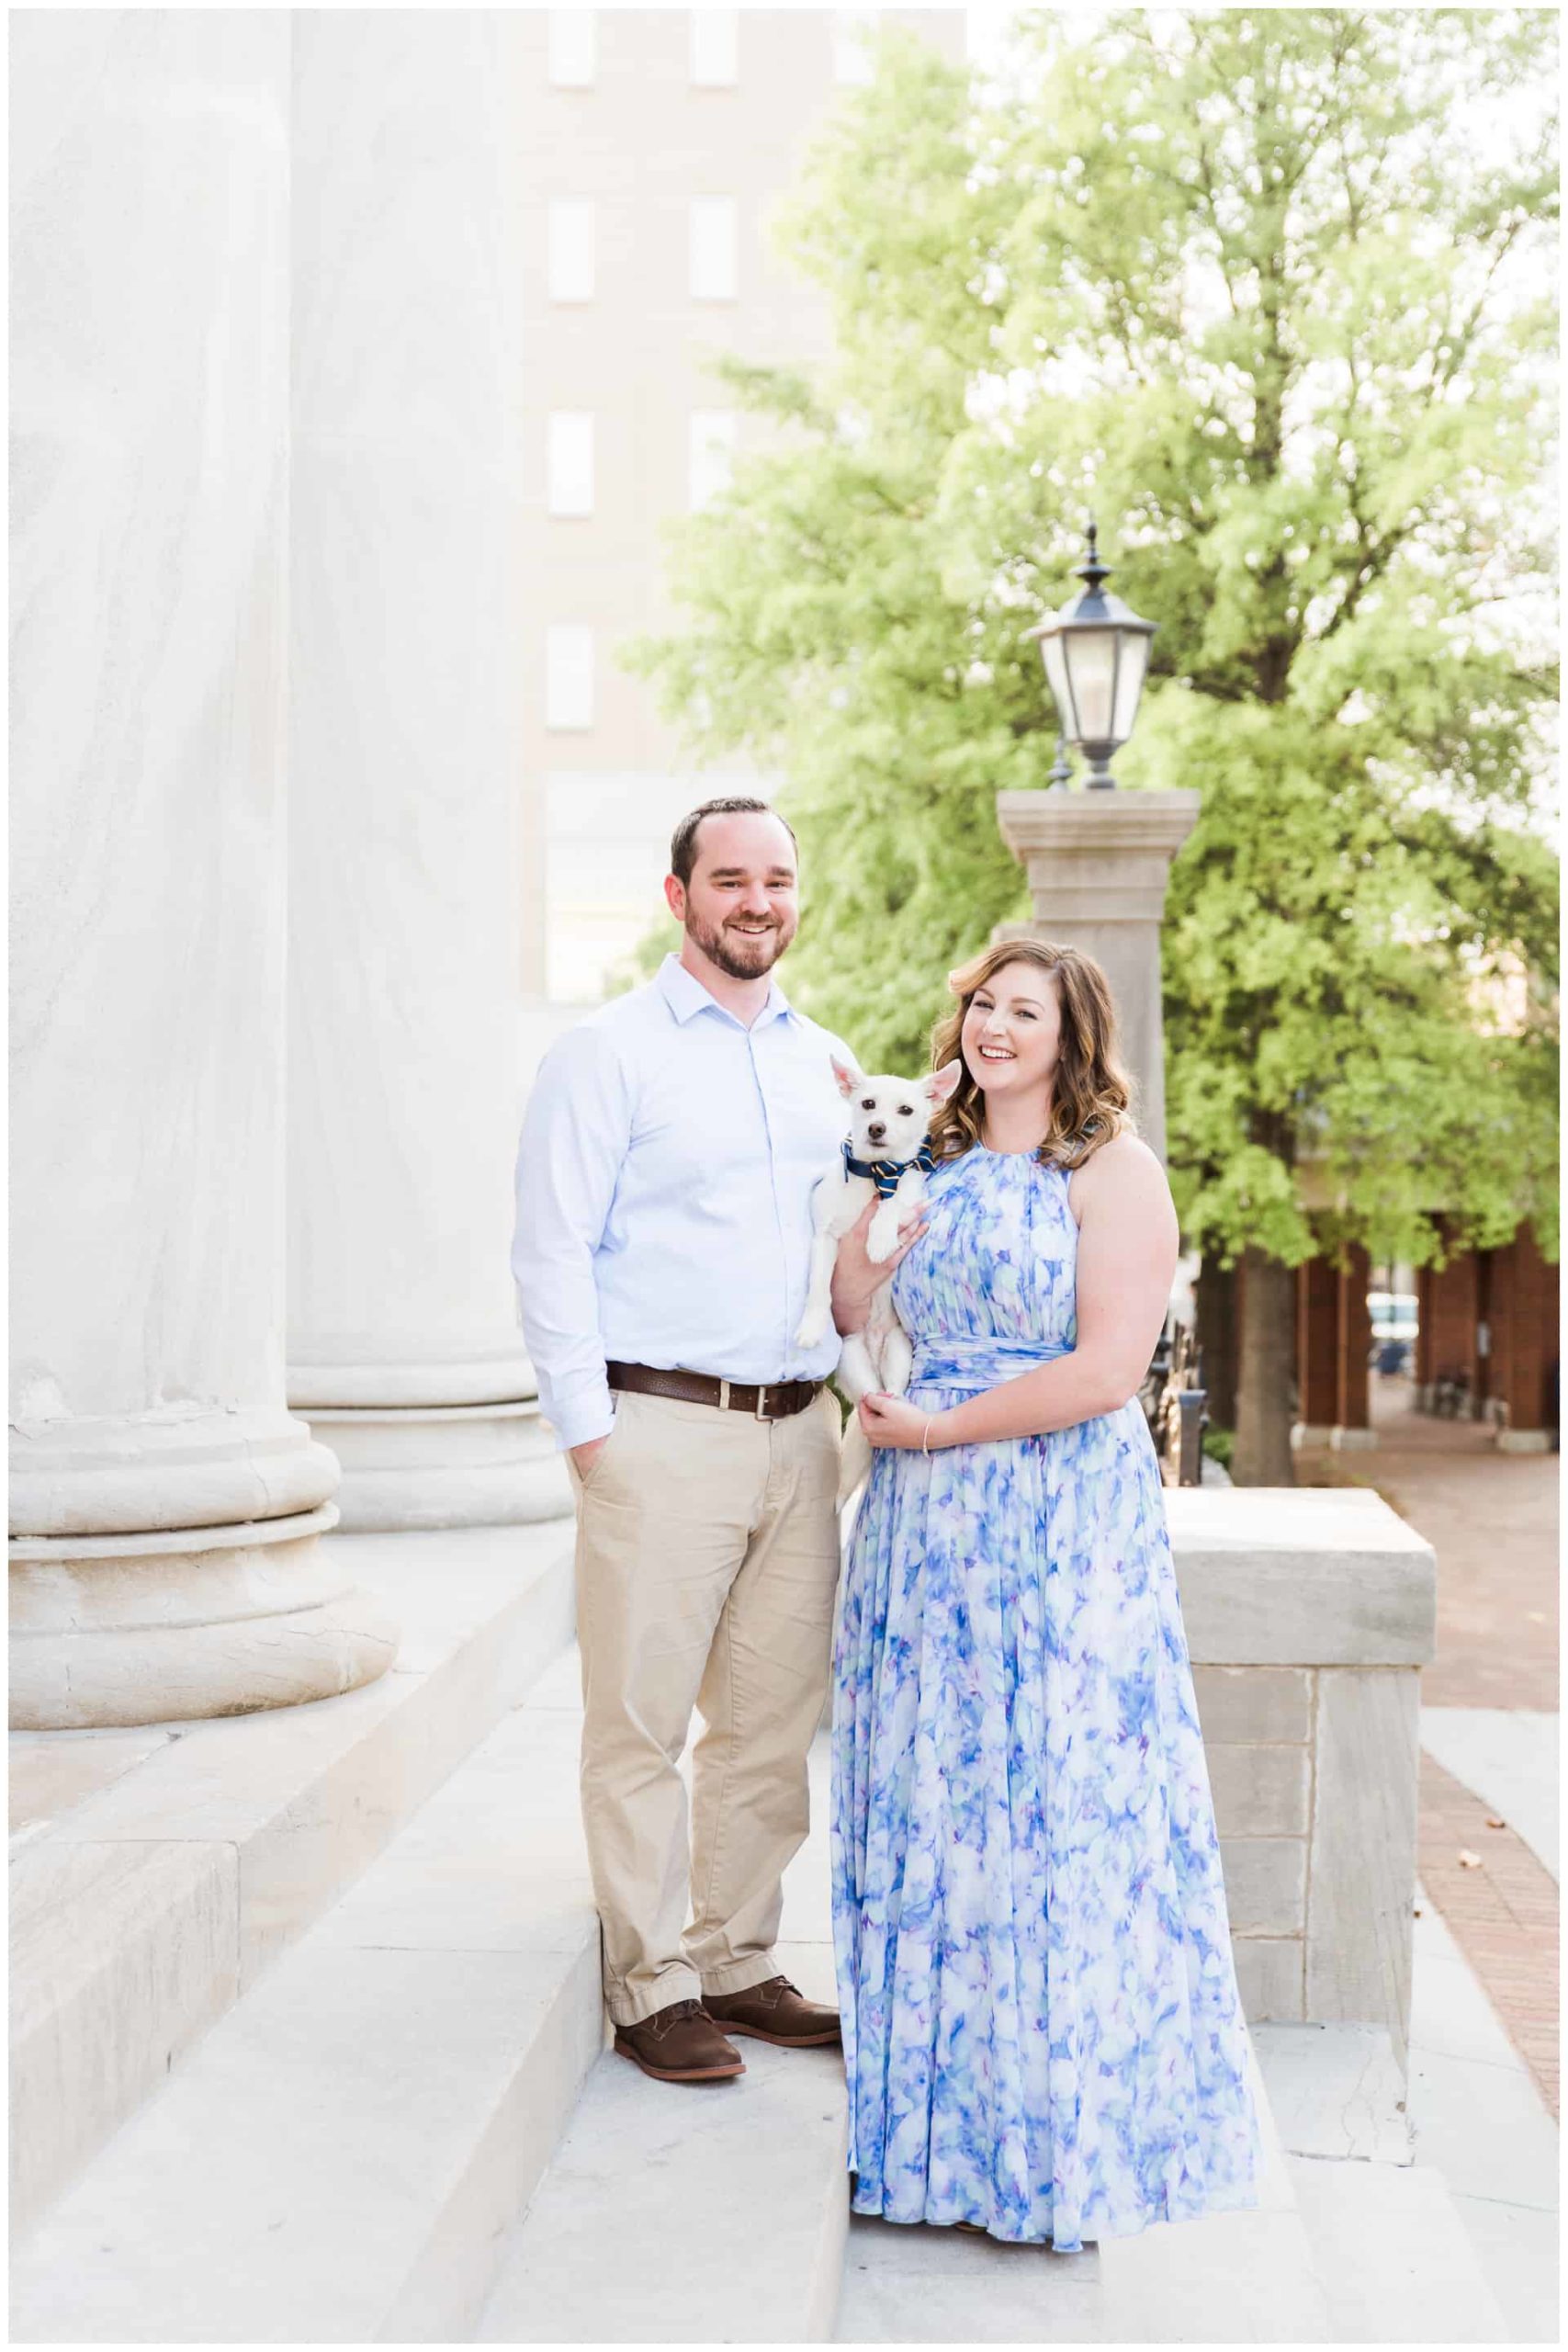 connie-jon-downtown-huntsville-engagement-session-with-dog-2